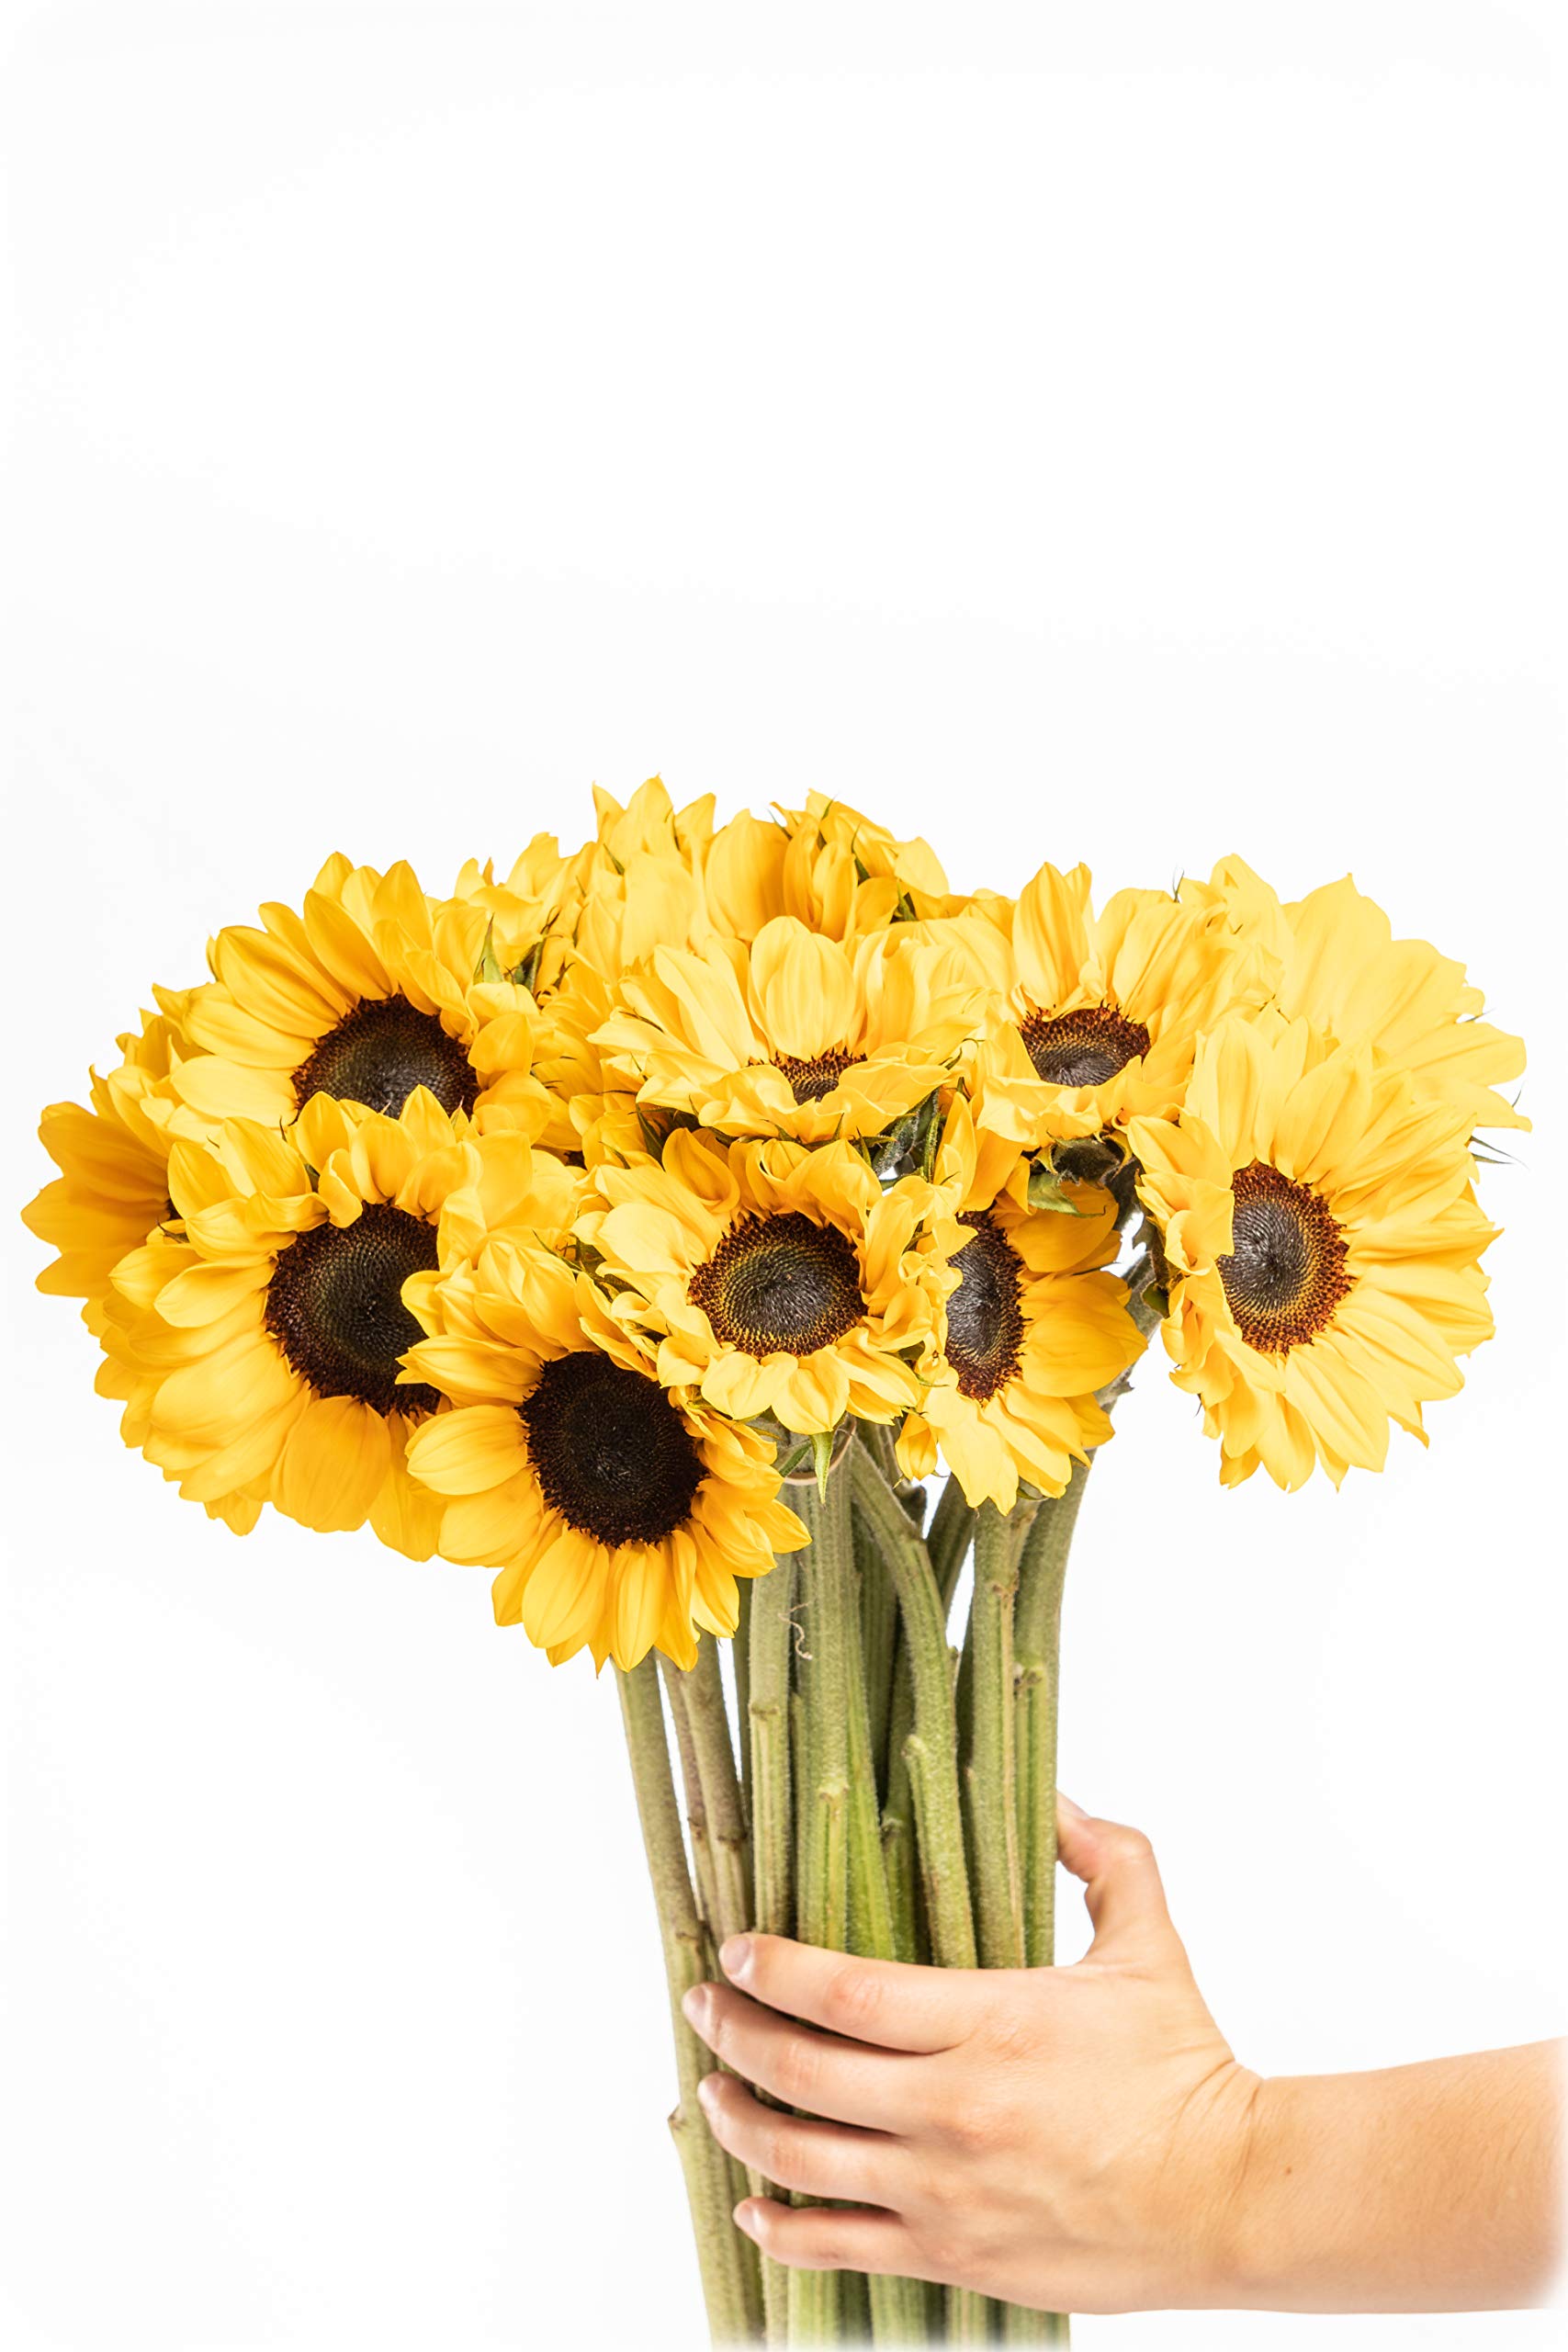 Greenchoice Flowers - Fresh Cut Sunflowers, Flowers for Delivery Prime, Birthday Flowers , Sunflower Bouquet (15 Stems)